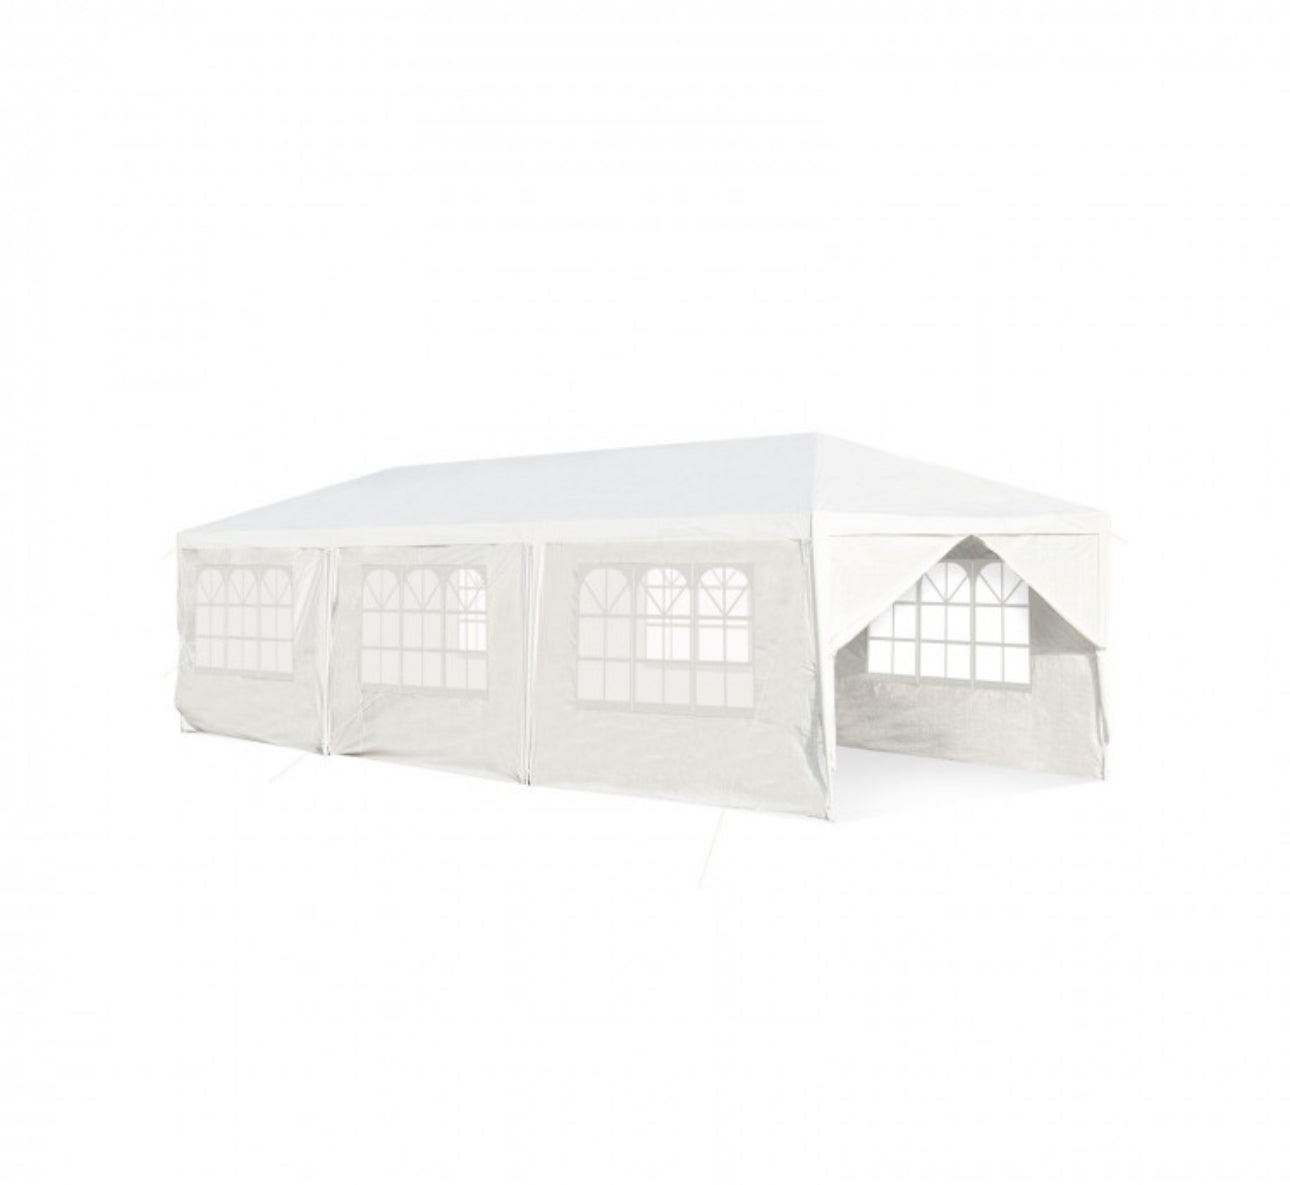 Very Cool 10x30 FT Heavy Duty Outdoor Canopy Tent With 6 Removable Sidewalls | 2 Doorways | Transparent Windows | Spacious | Patio